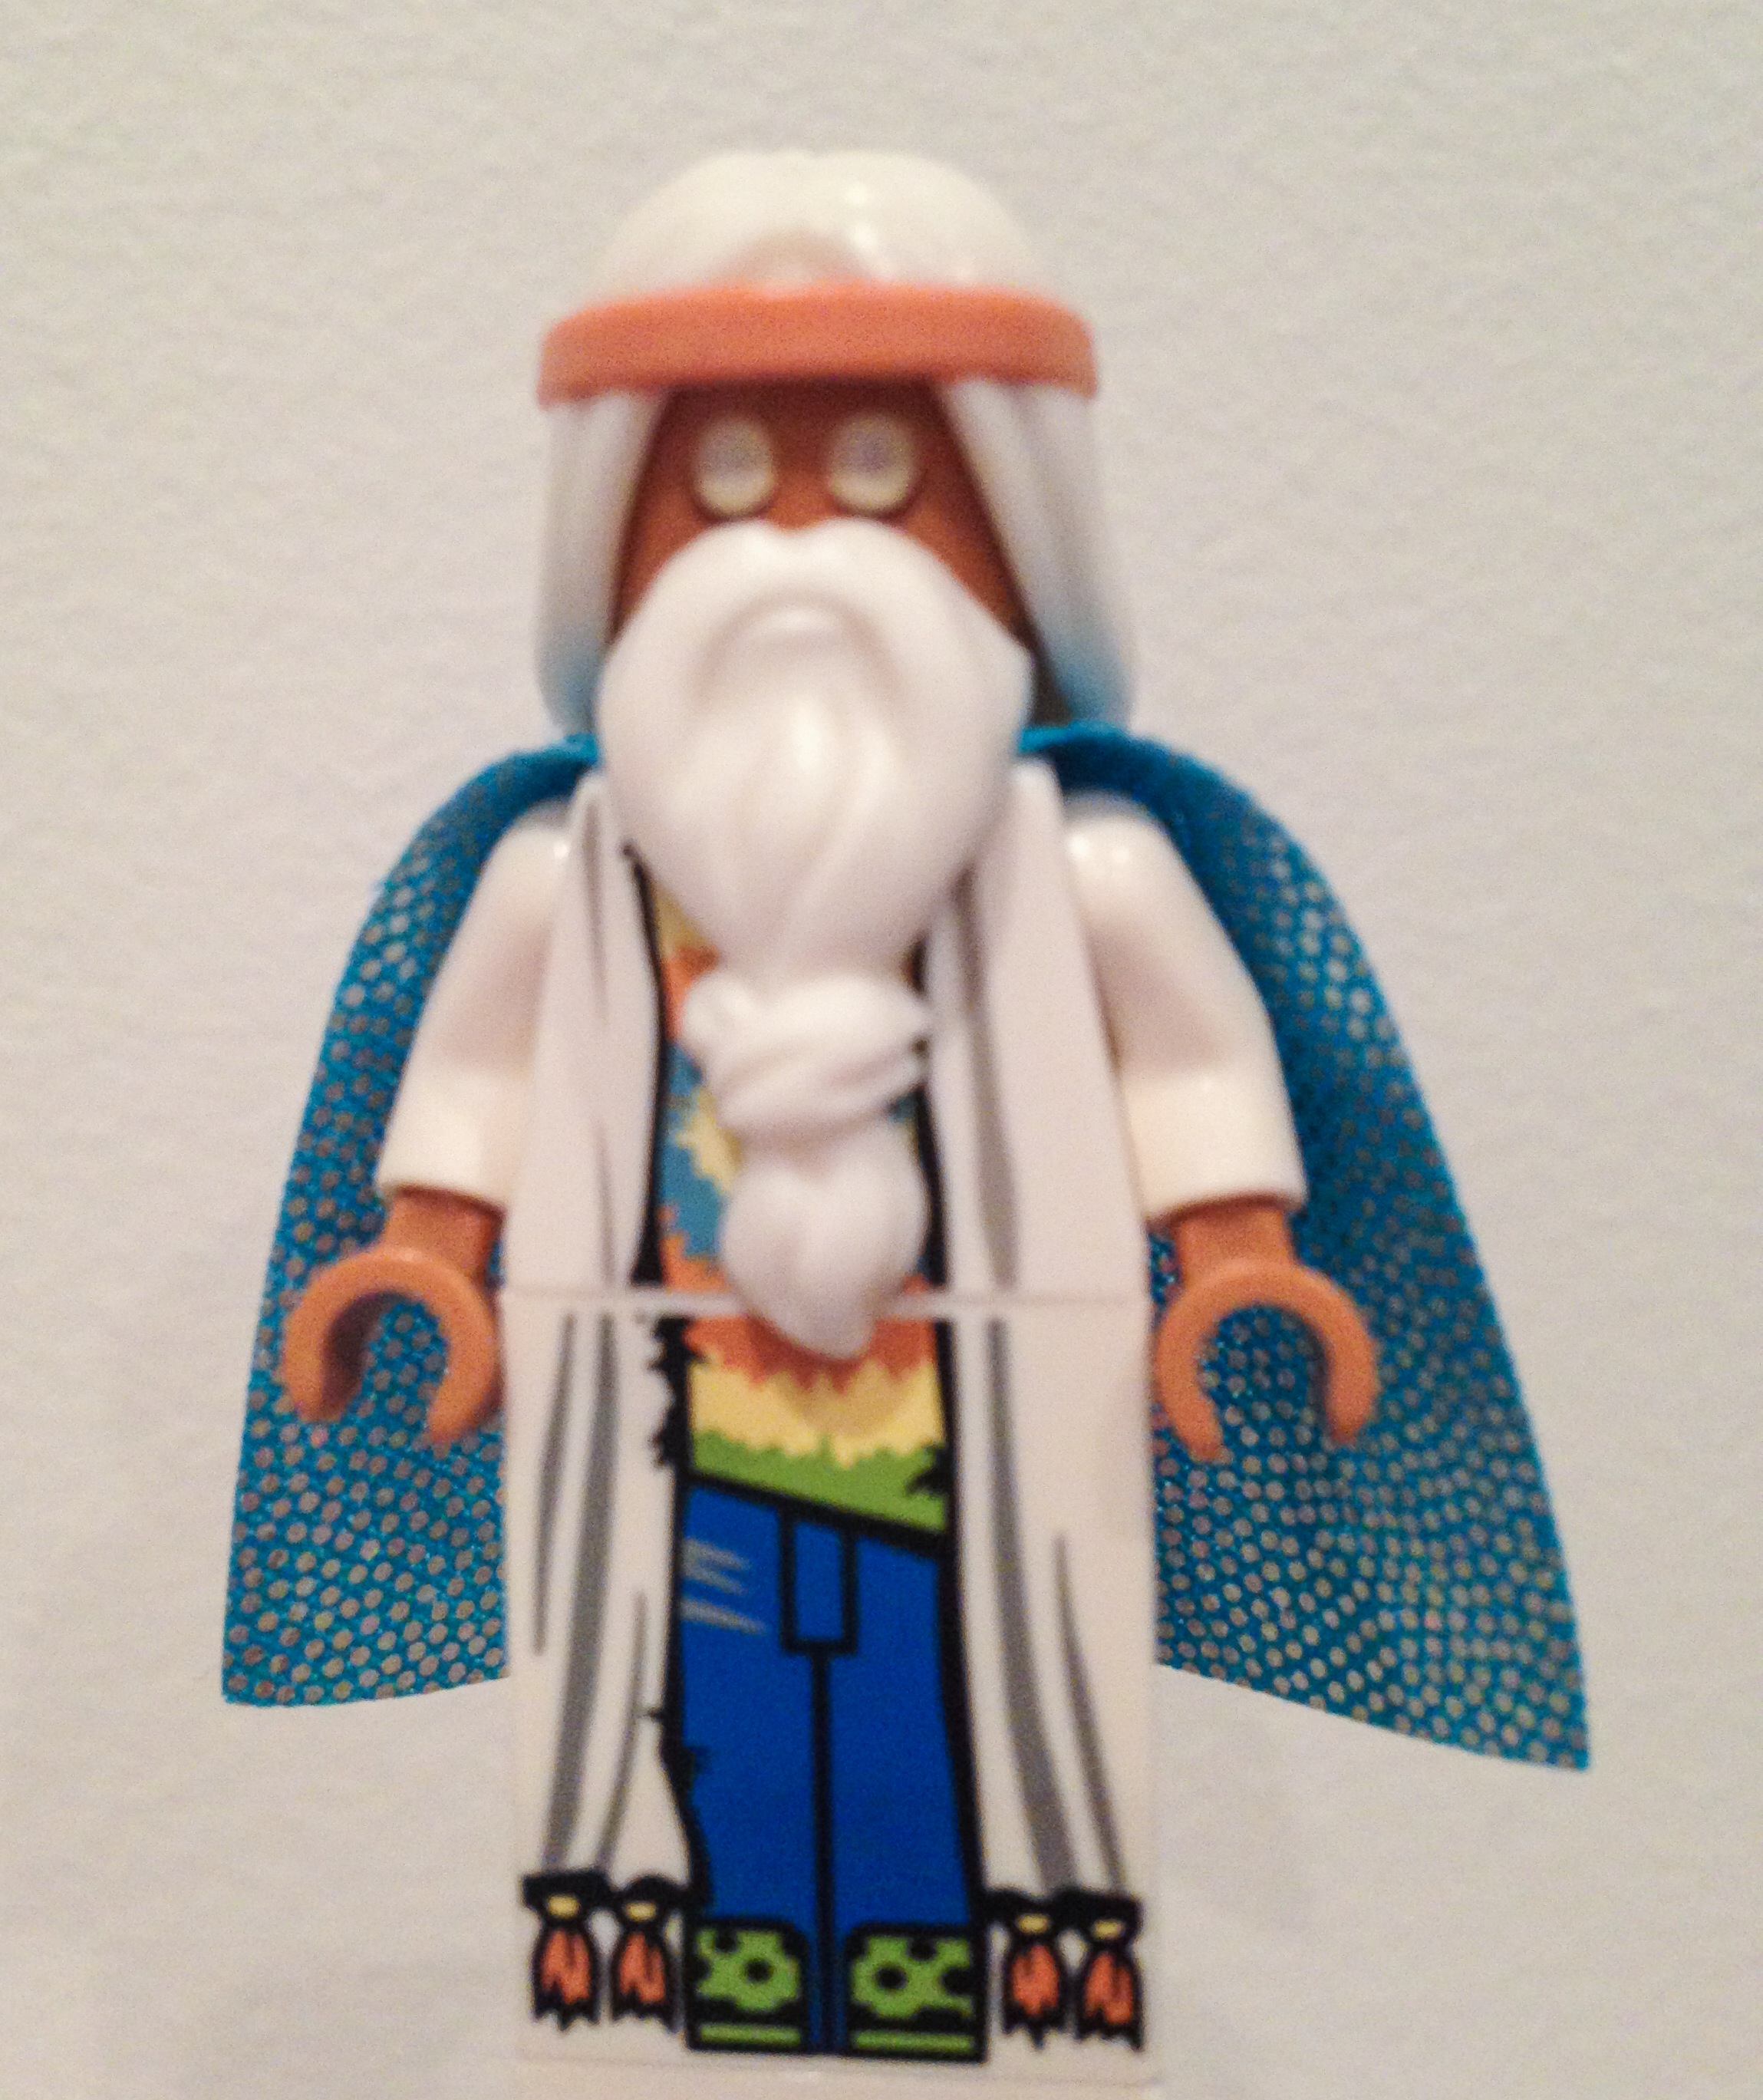 gta edition - Vitruvius Without Text